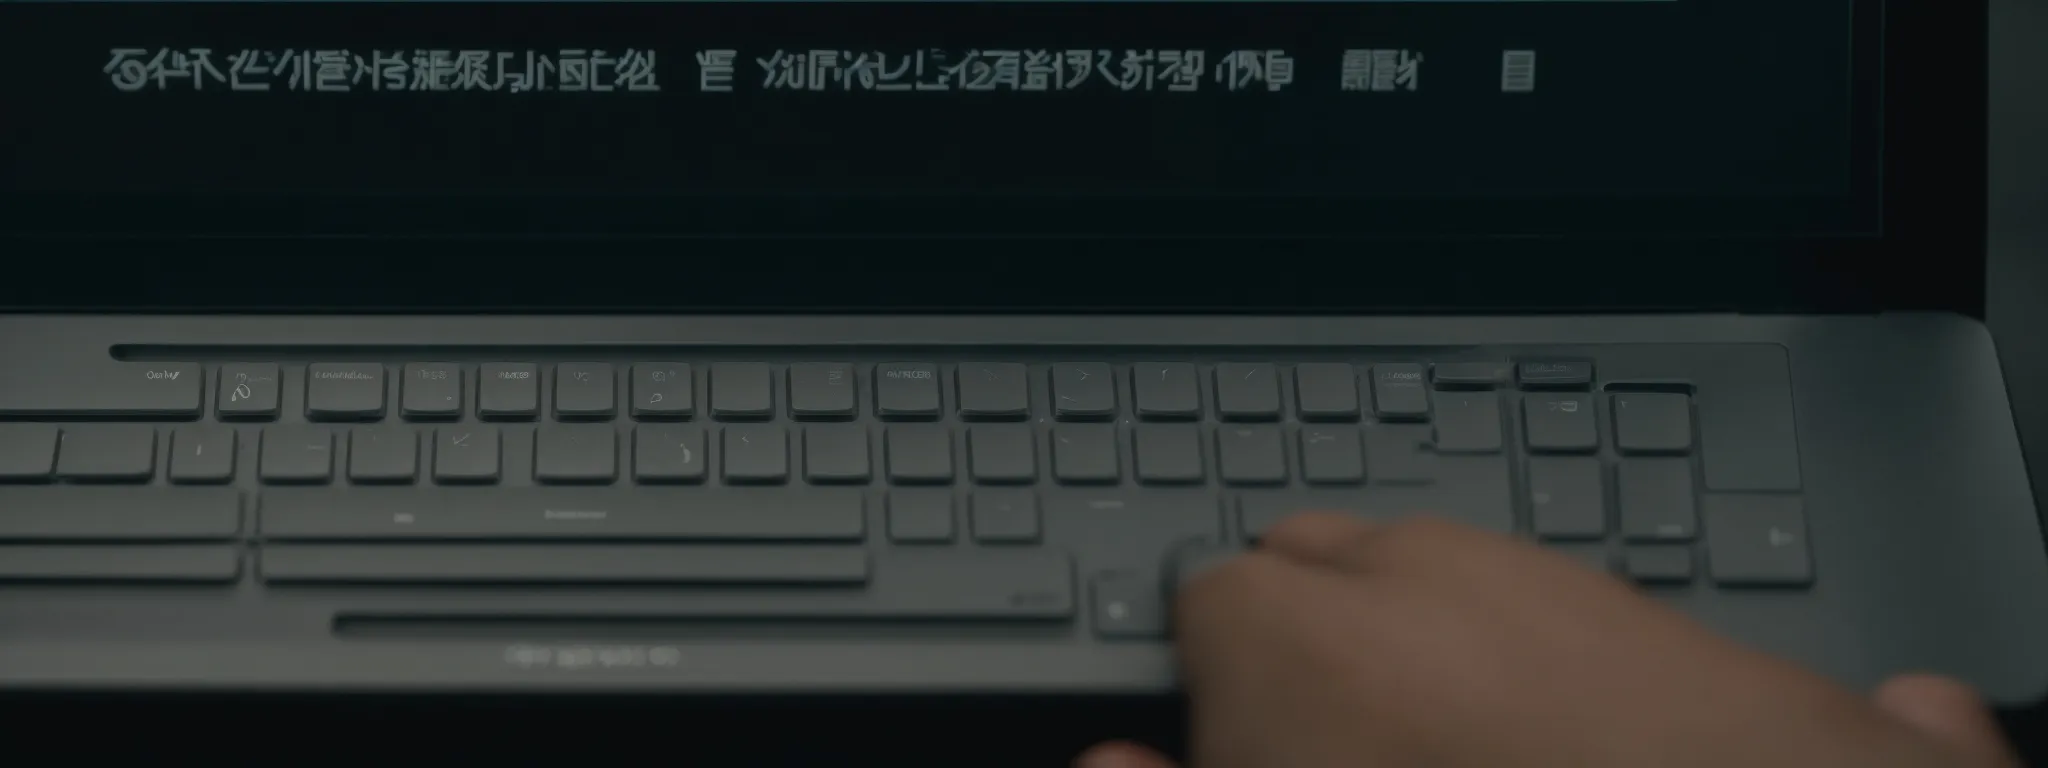 a close-up of an individual typing on a laptop, with a focus on the screen displaying a word processing application and text.